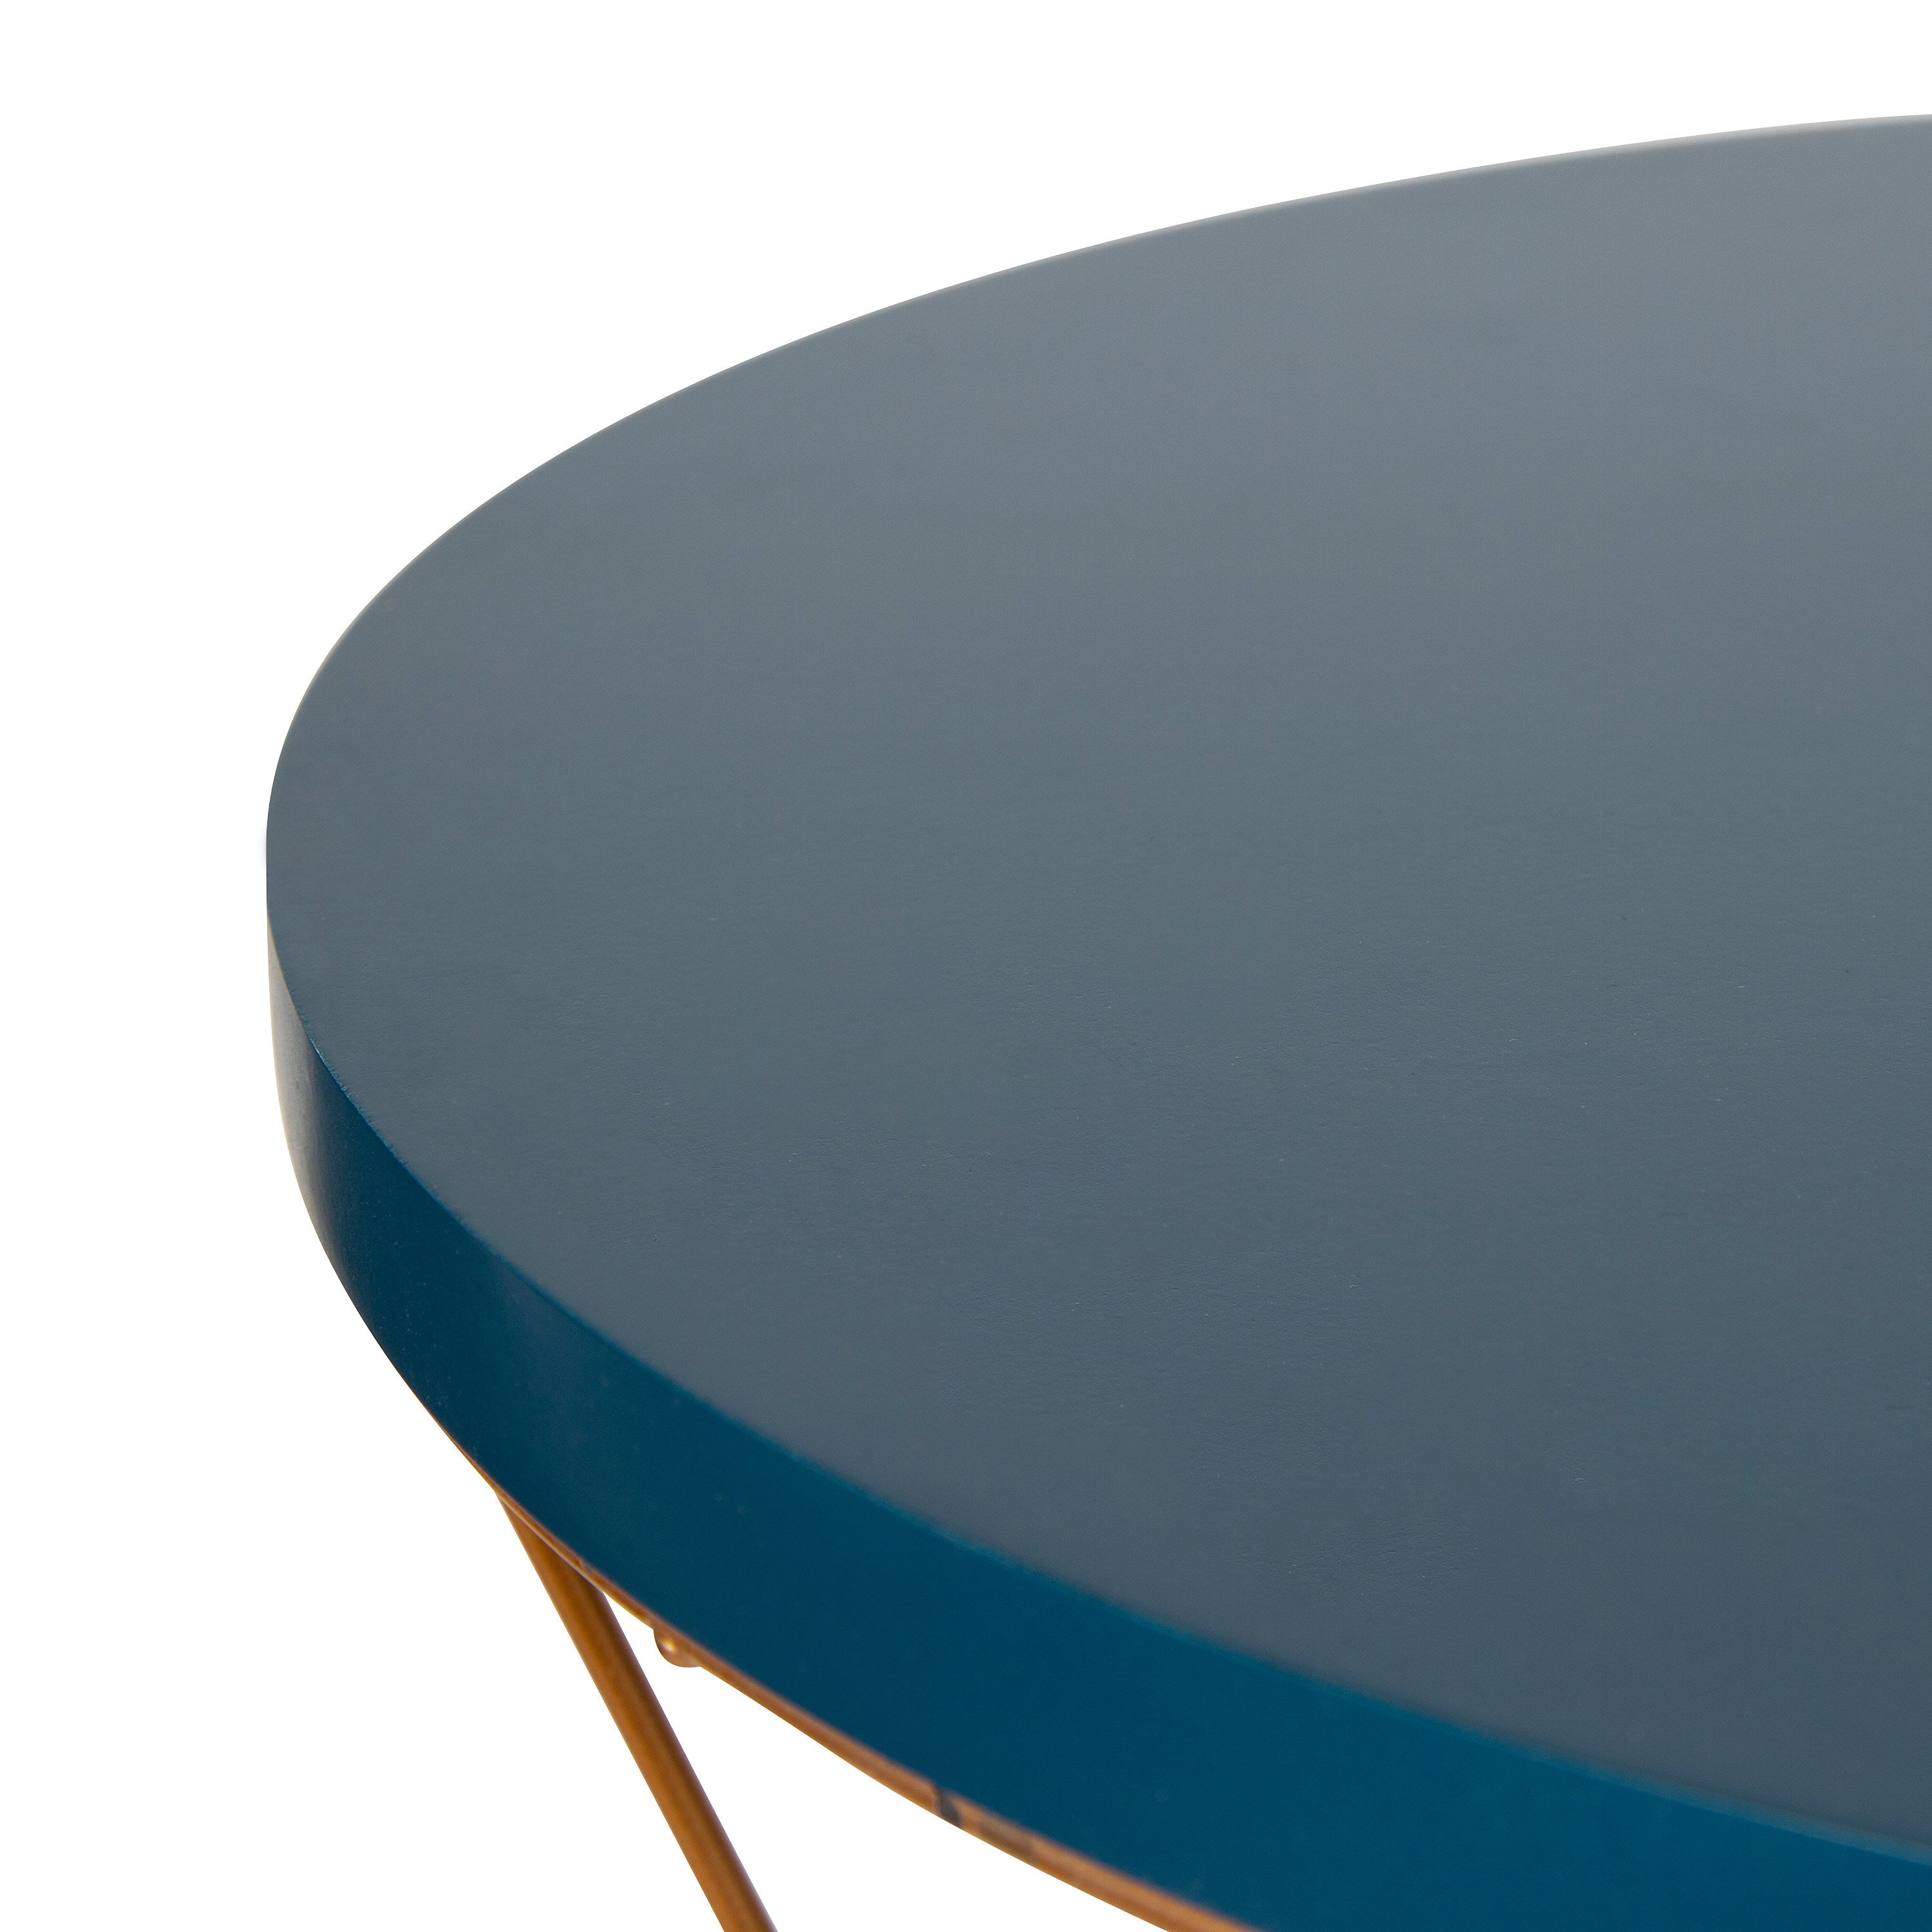 Mendel Round Metal Accent Table